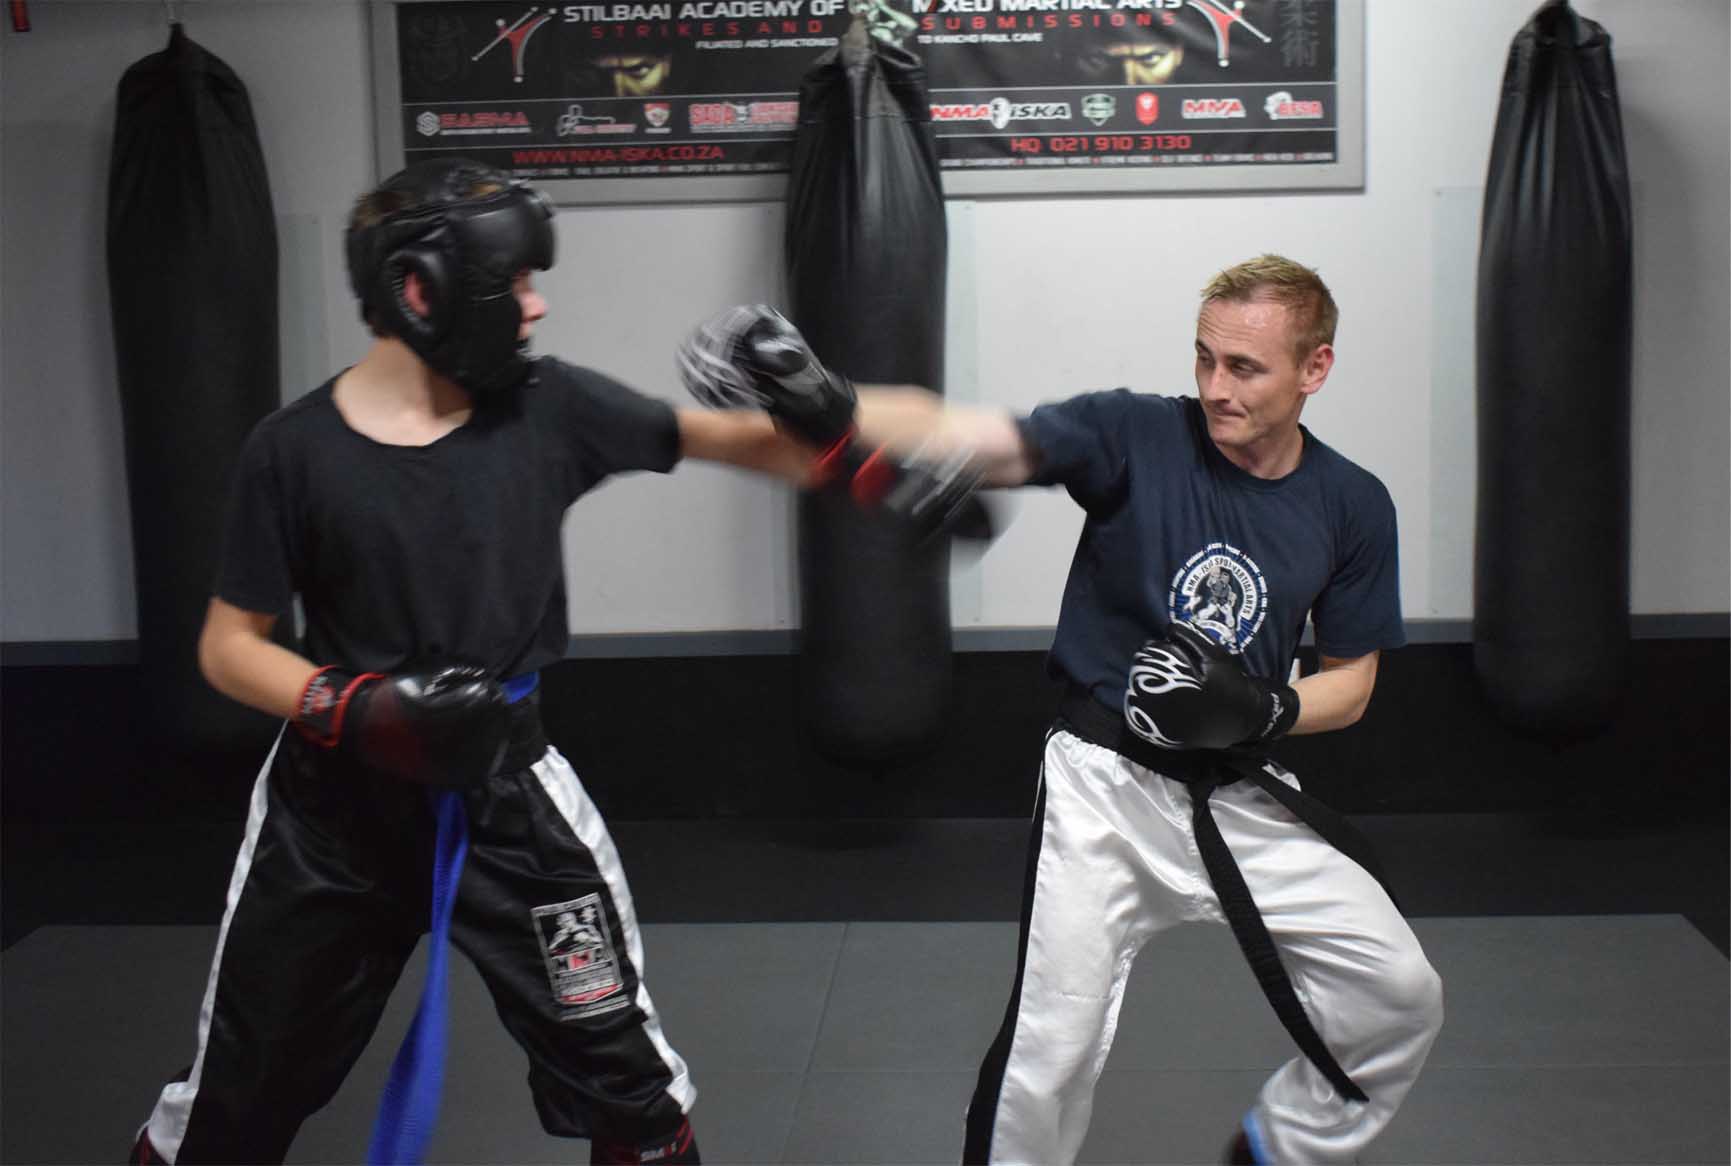 Kickboxers sparring in a training ring